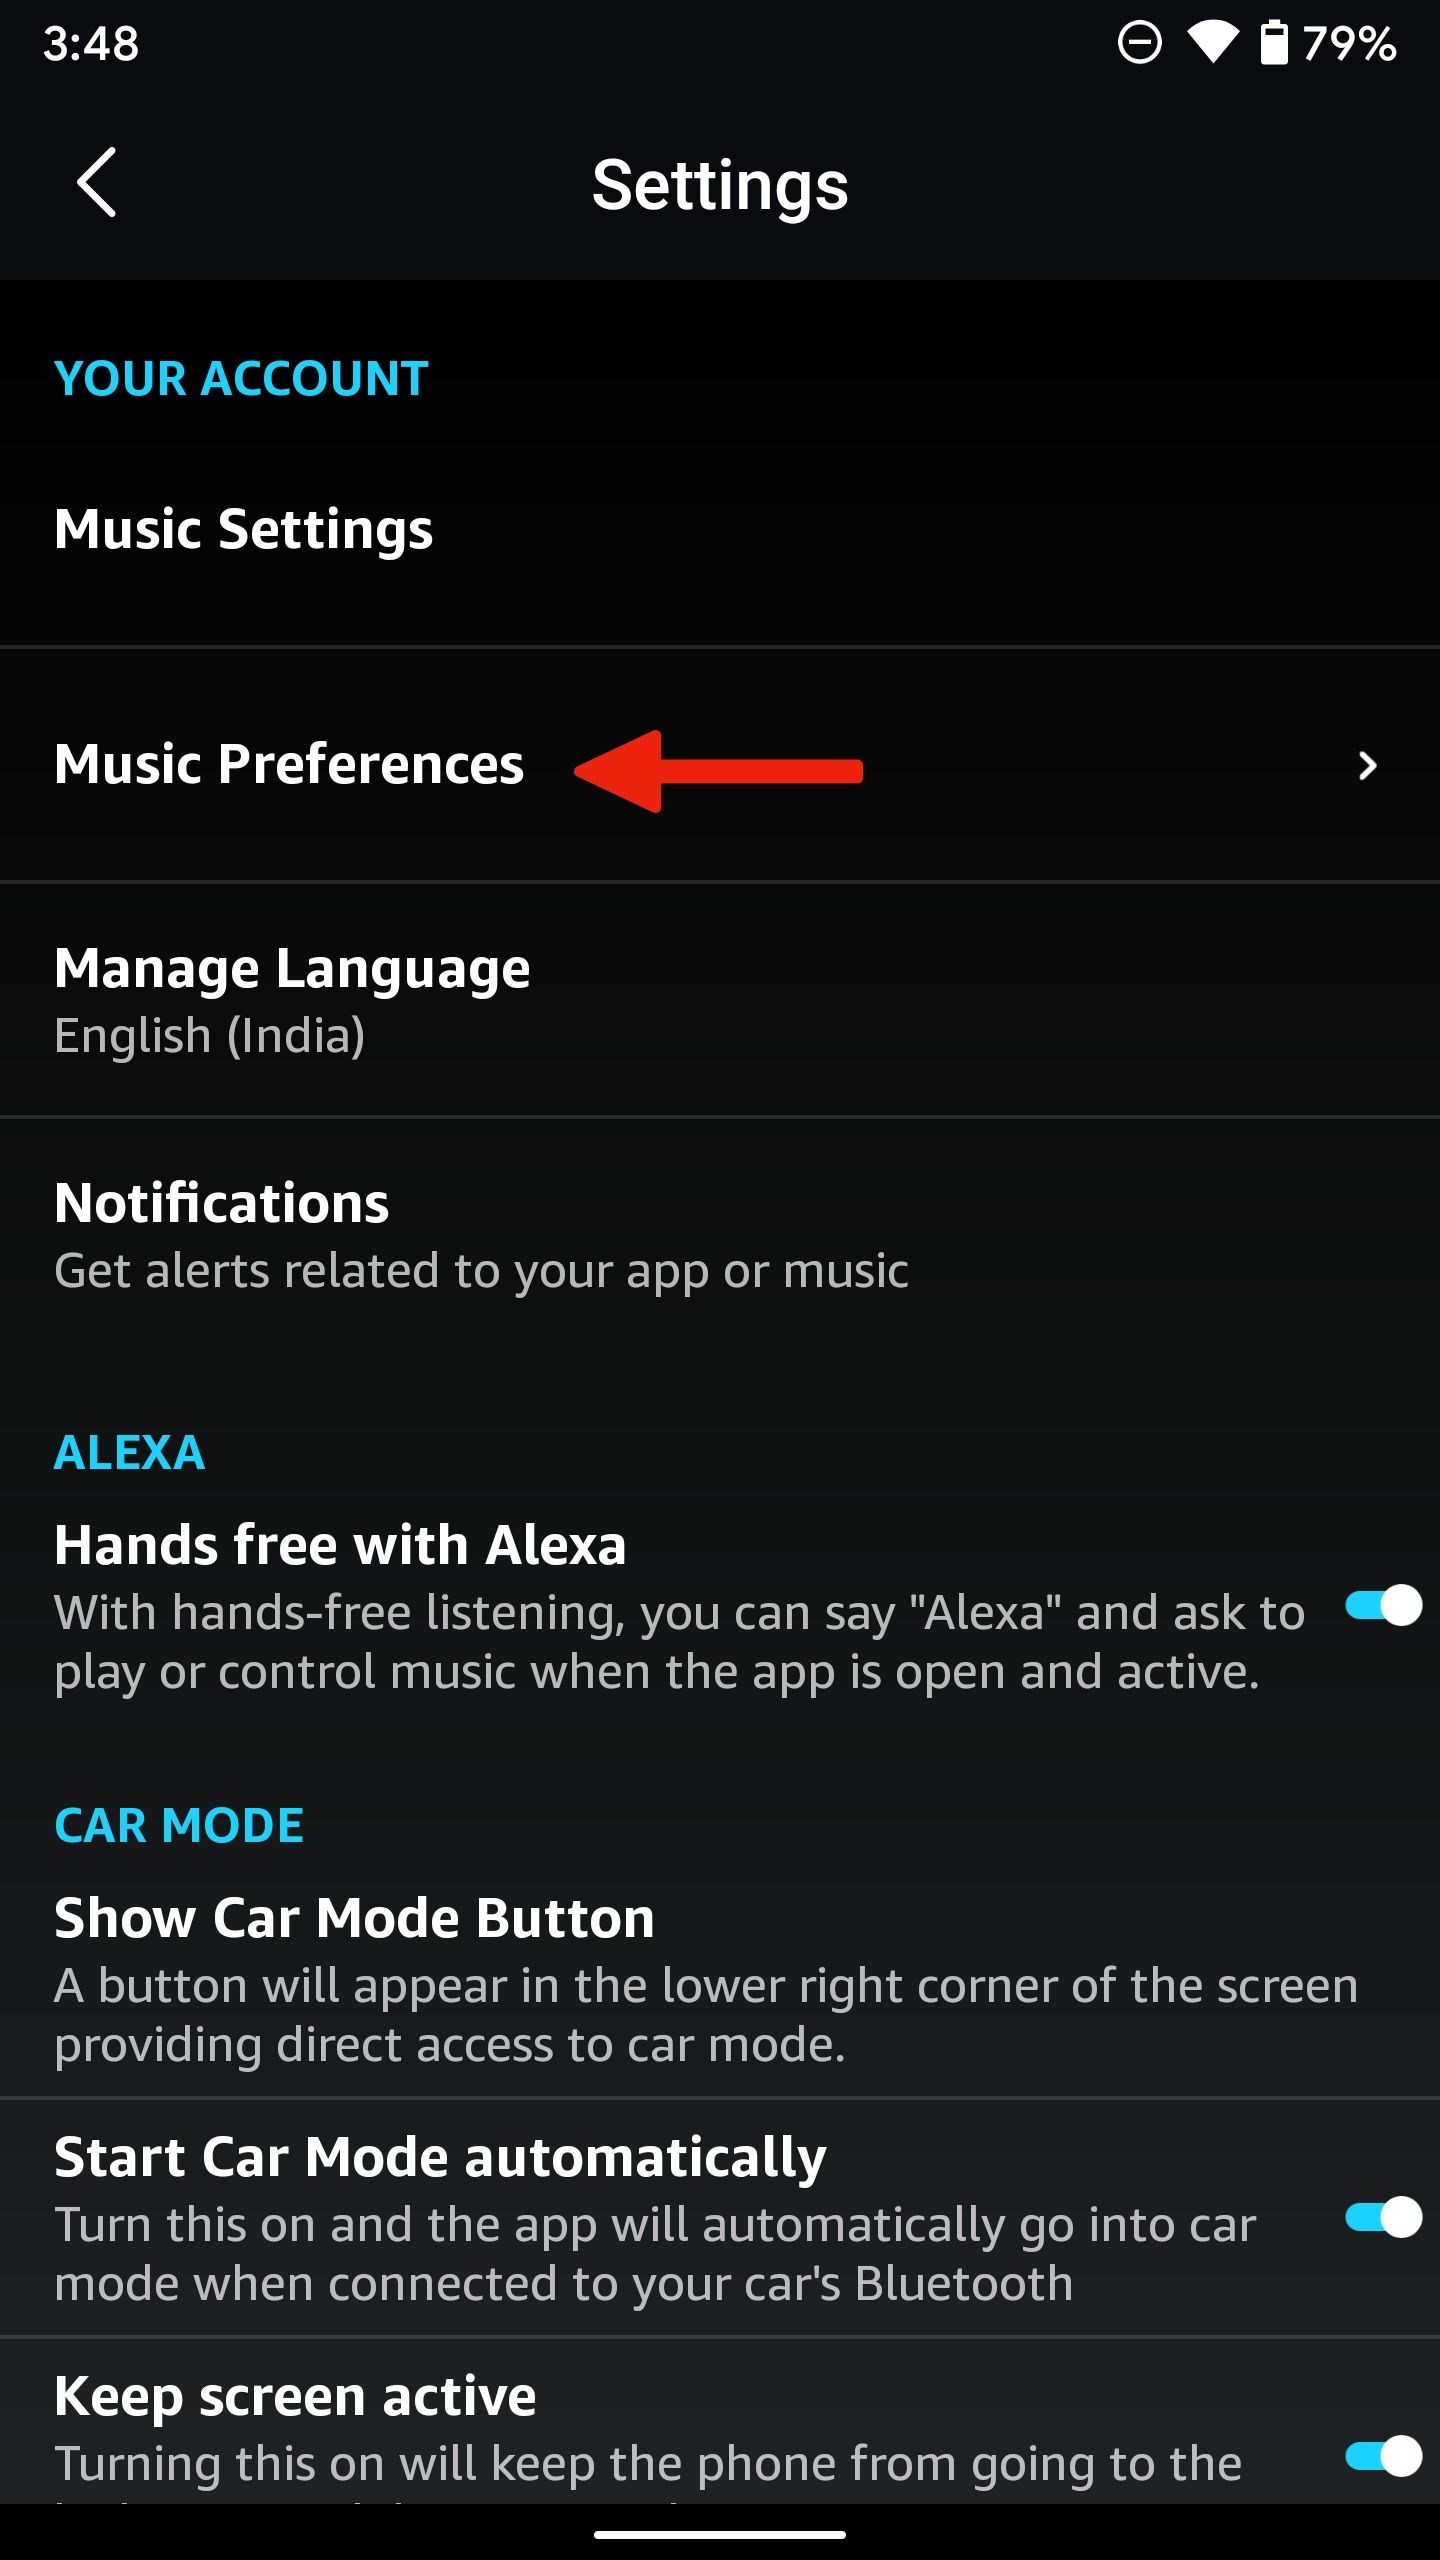 Settings page in the Amazon Music app with an arrow pointing to 